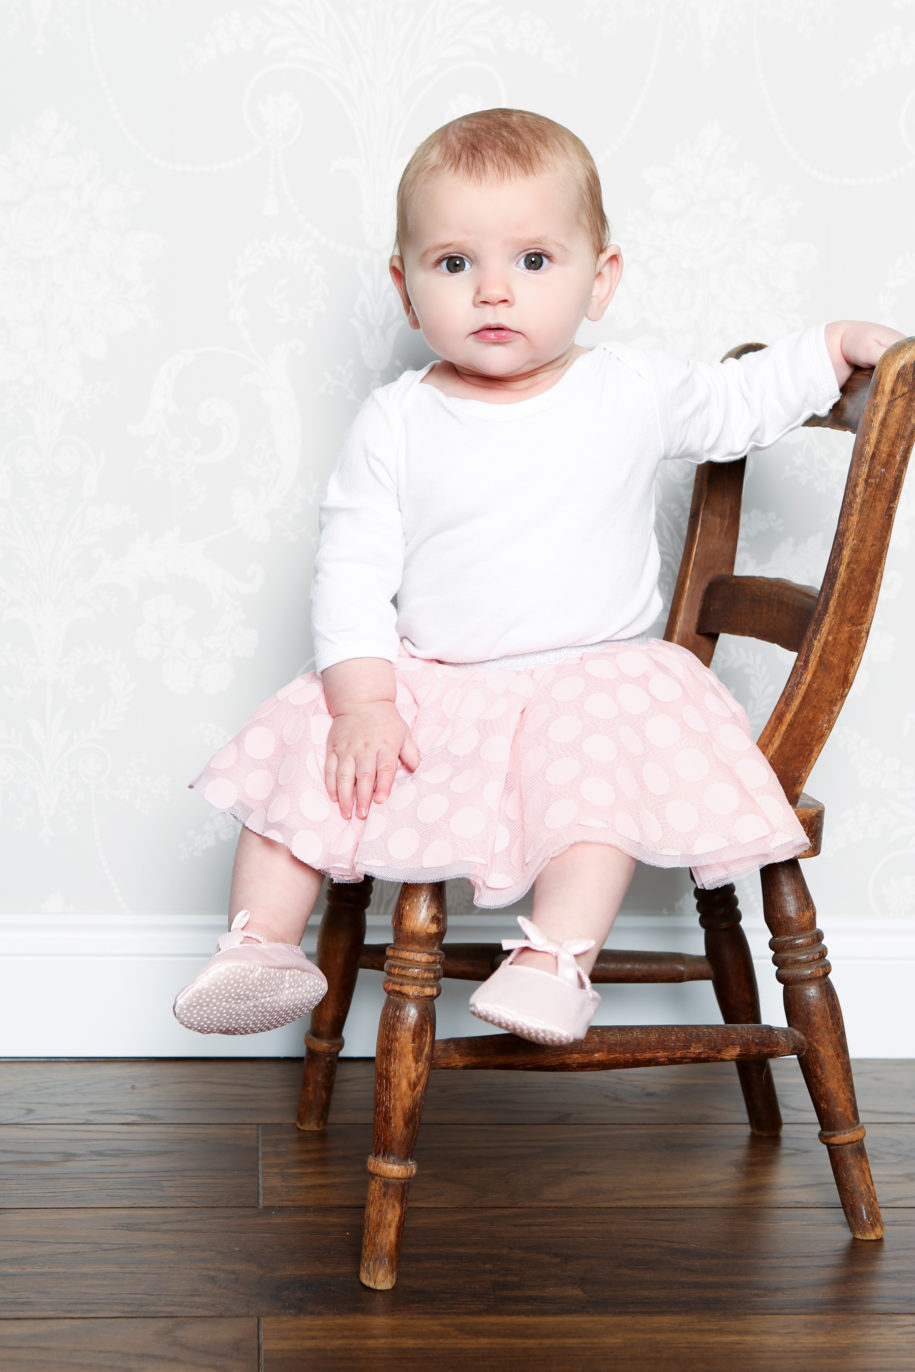 Baby Photography Gallery for 6-9 month old Babies - One Life Studio